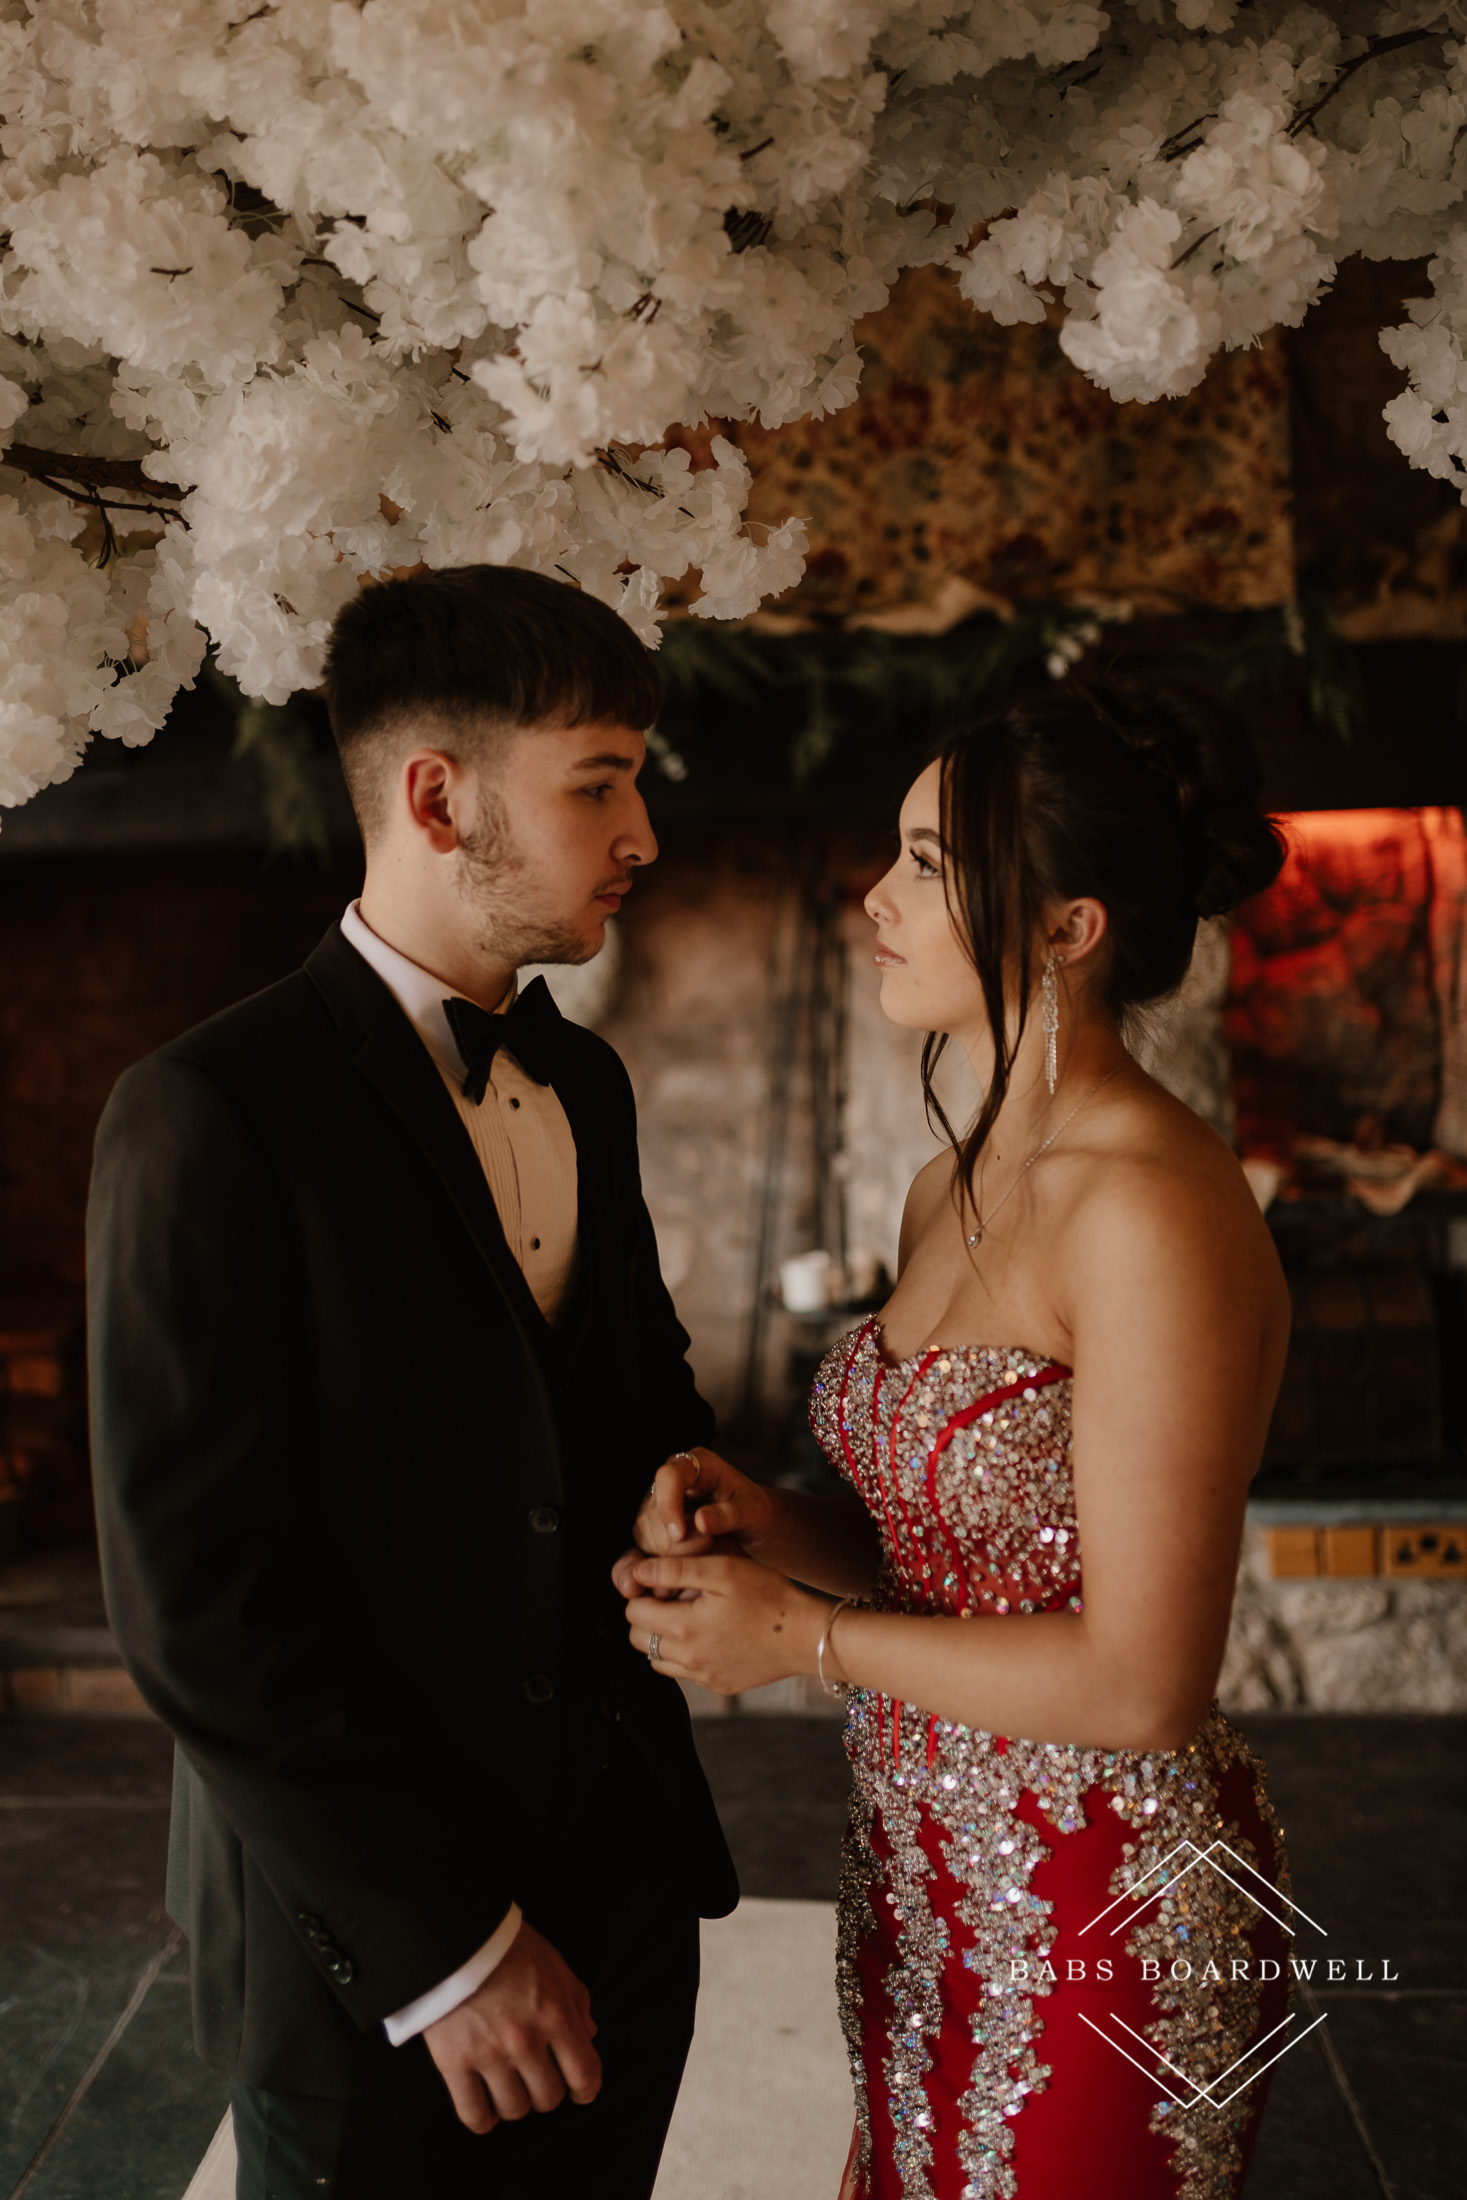 An intimate country club elopement in Ruthin